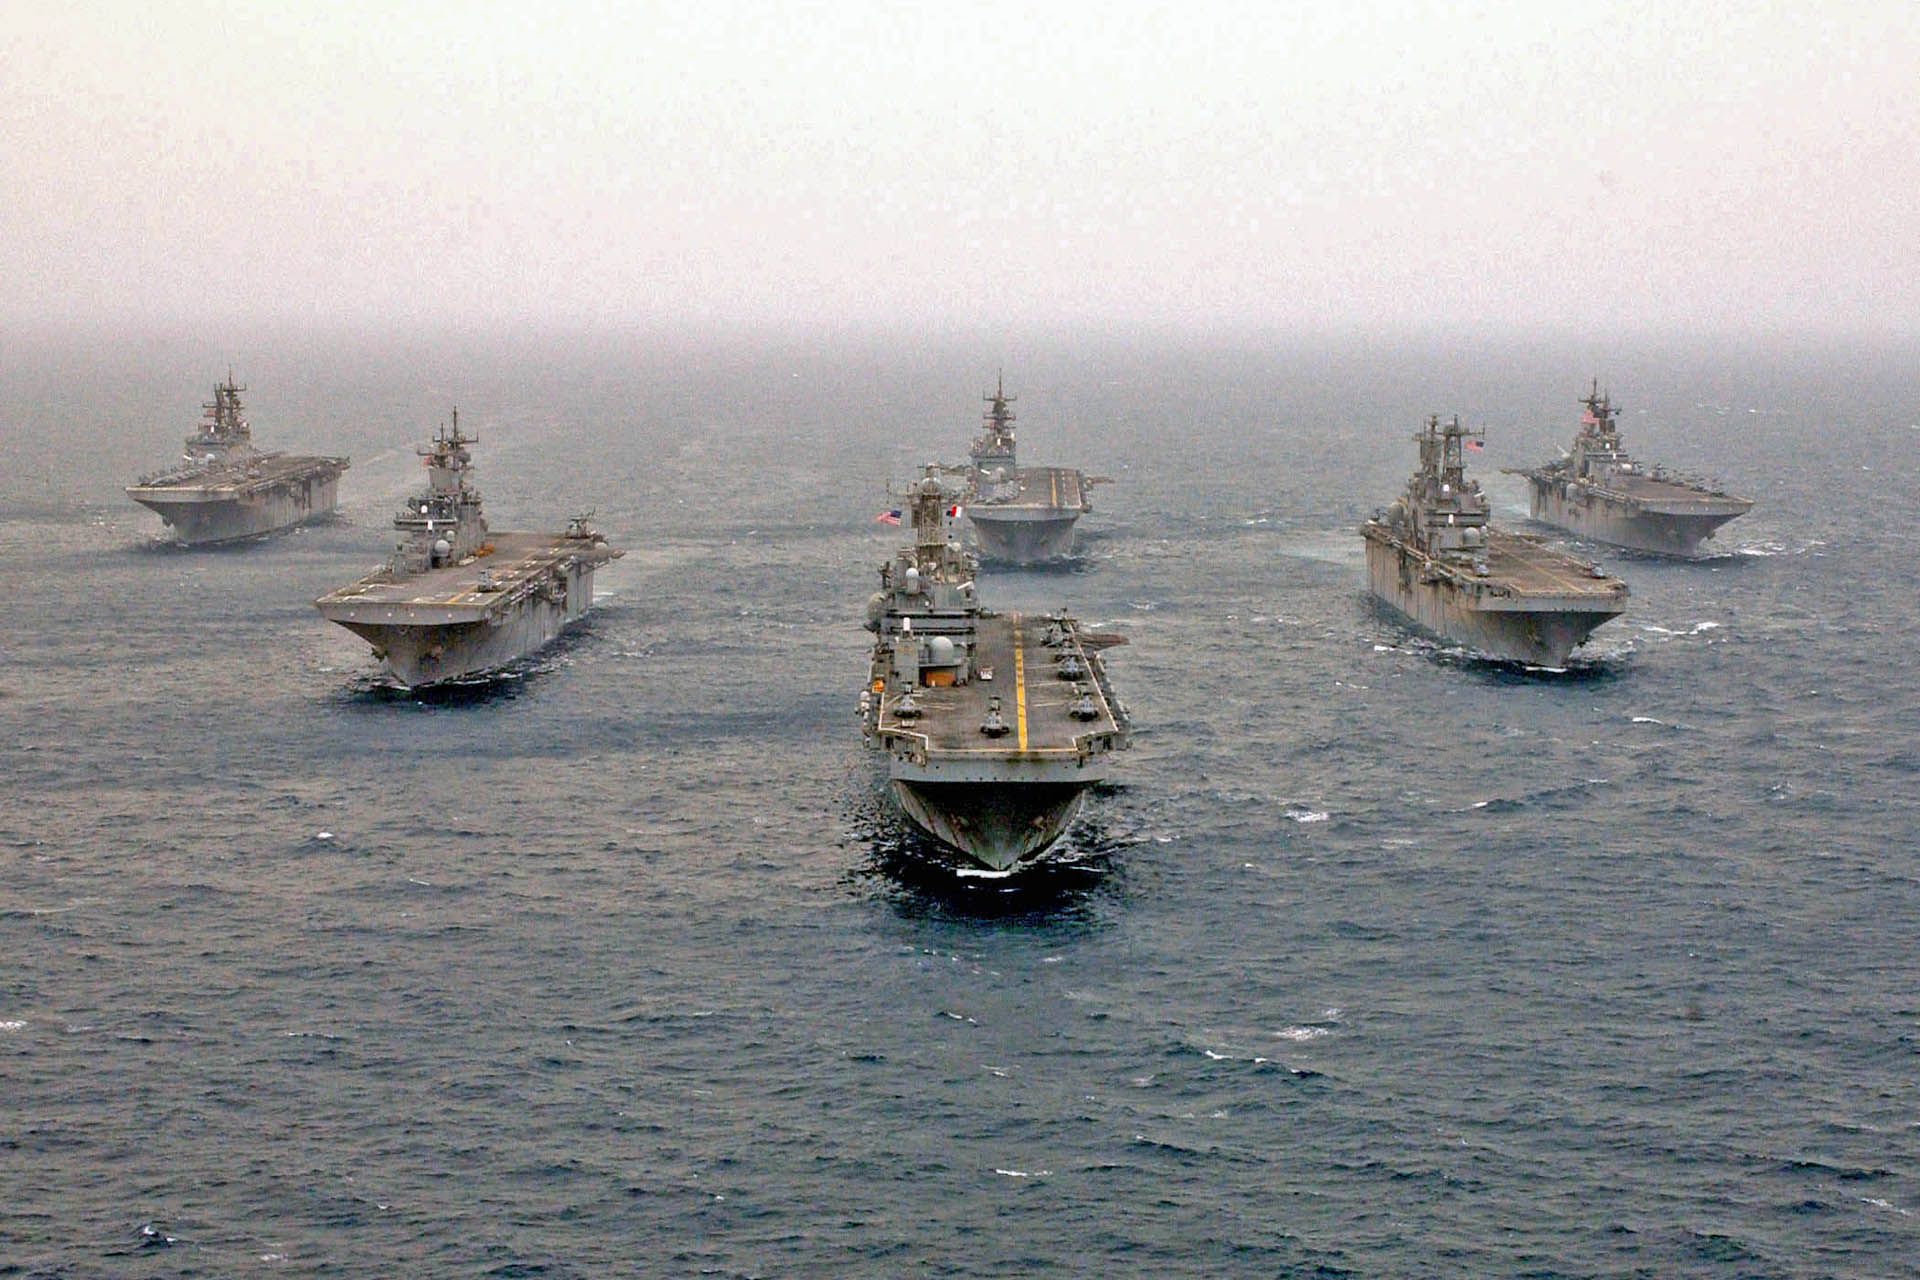 Aircraft_Carriers